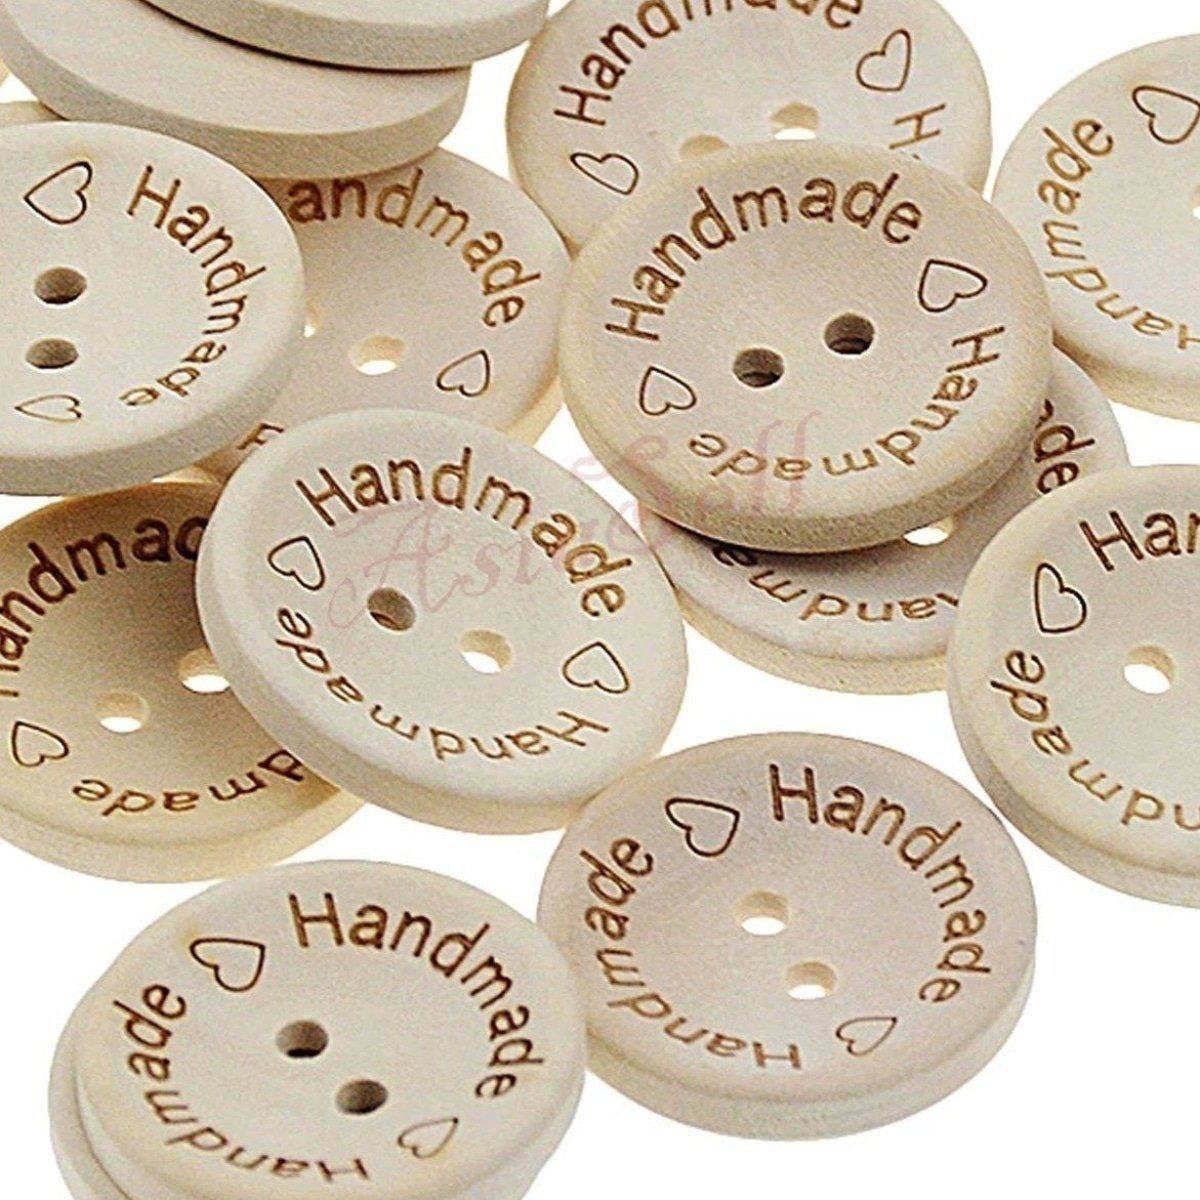 100pcs 2-Holes Handmade with Love Round Wooden Buttons Button Handmade Clothes - 15mm "Handmade Handmade" - - Asia Sell